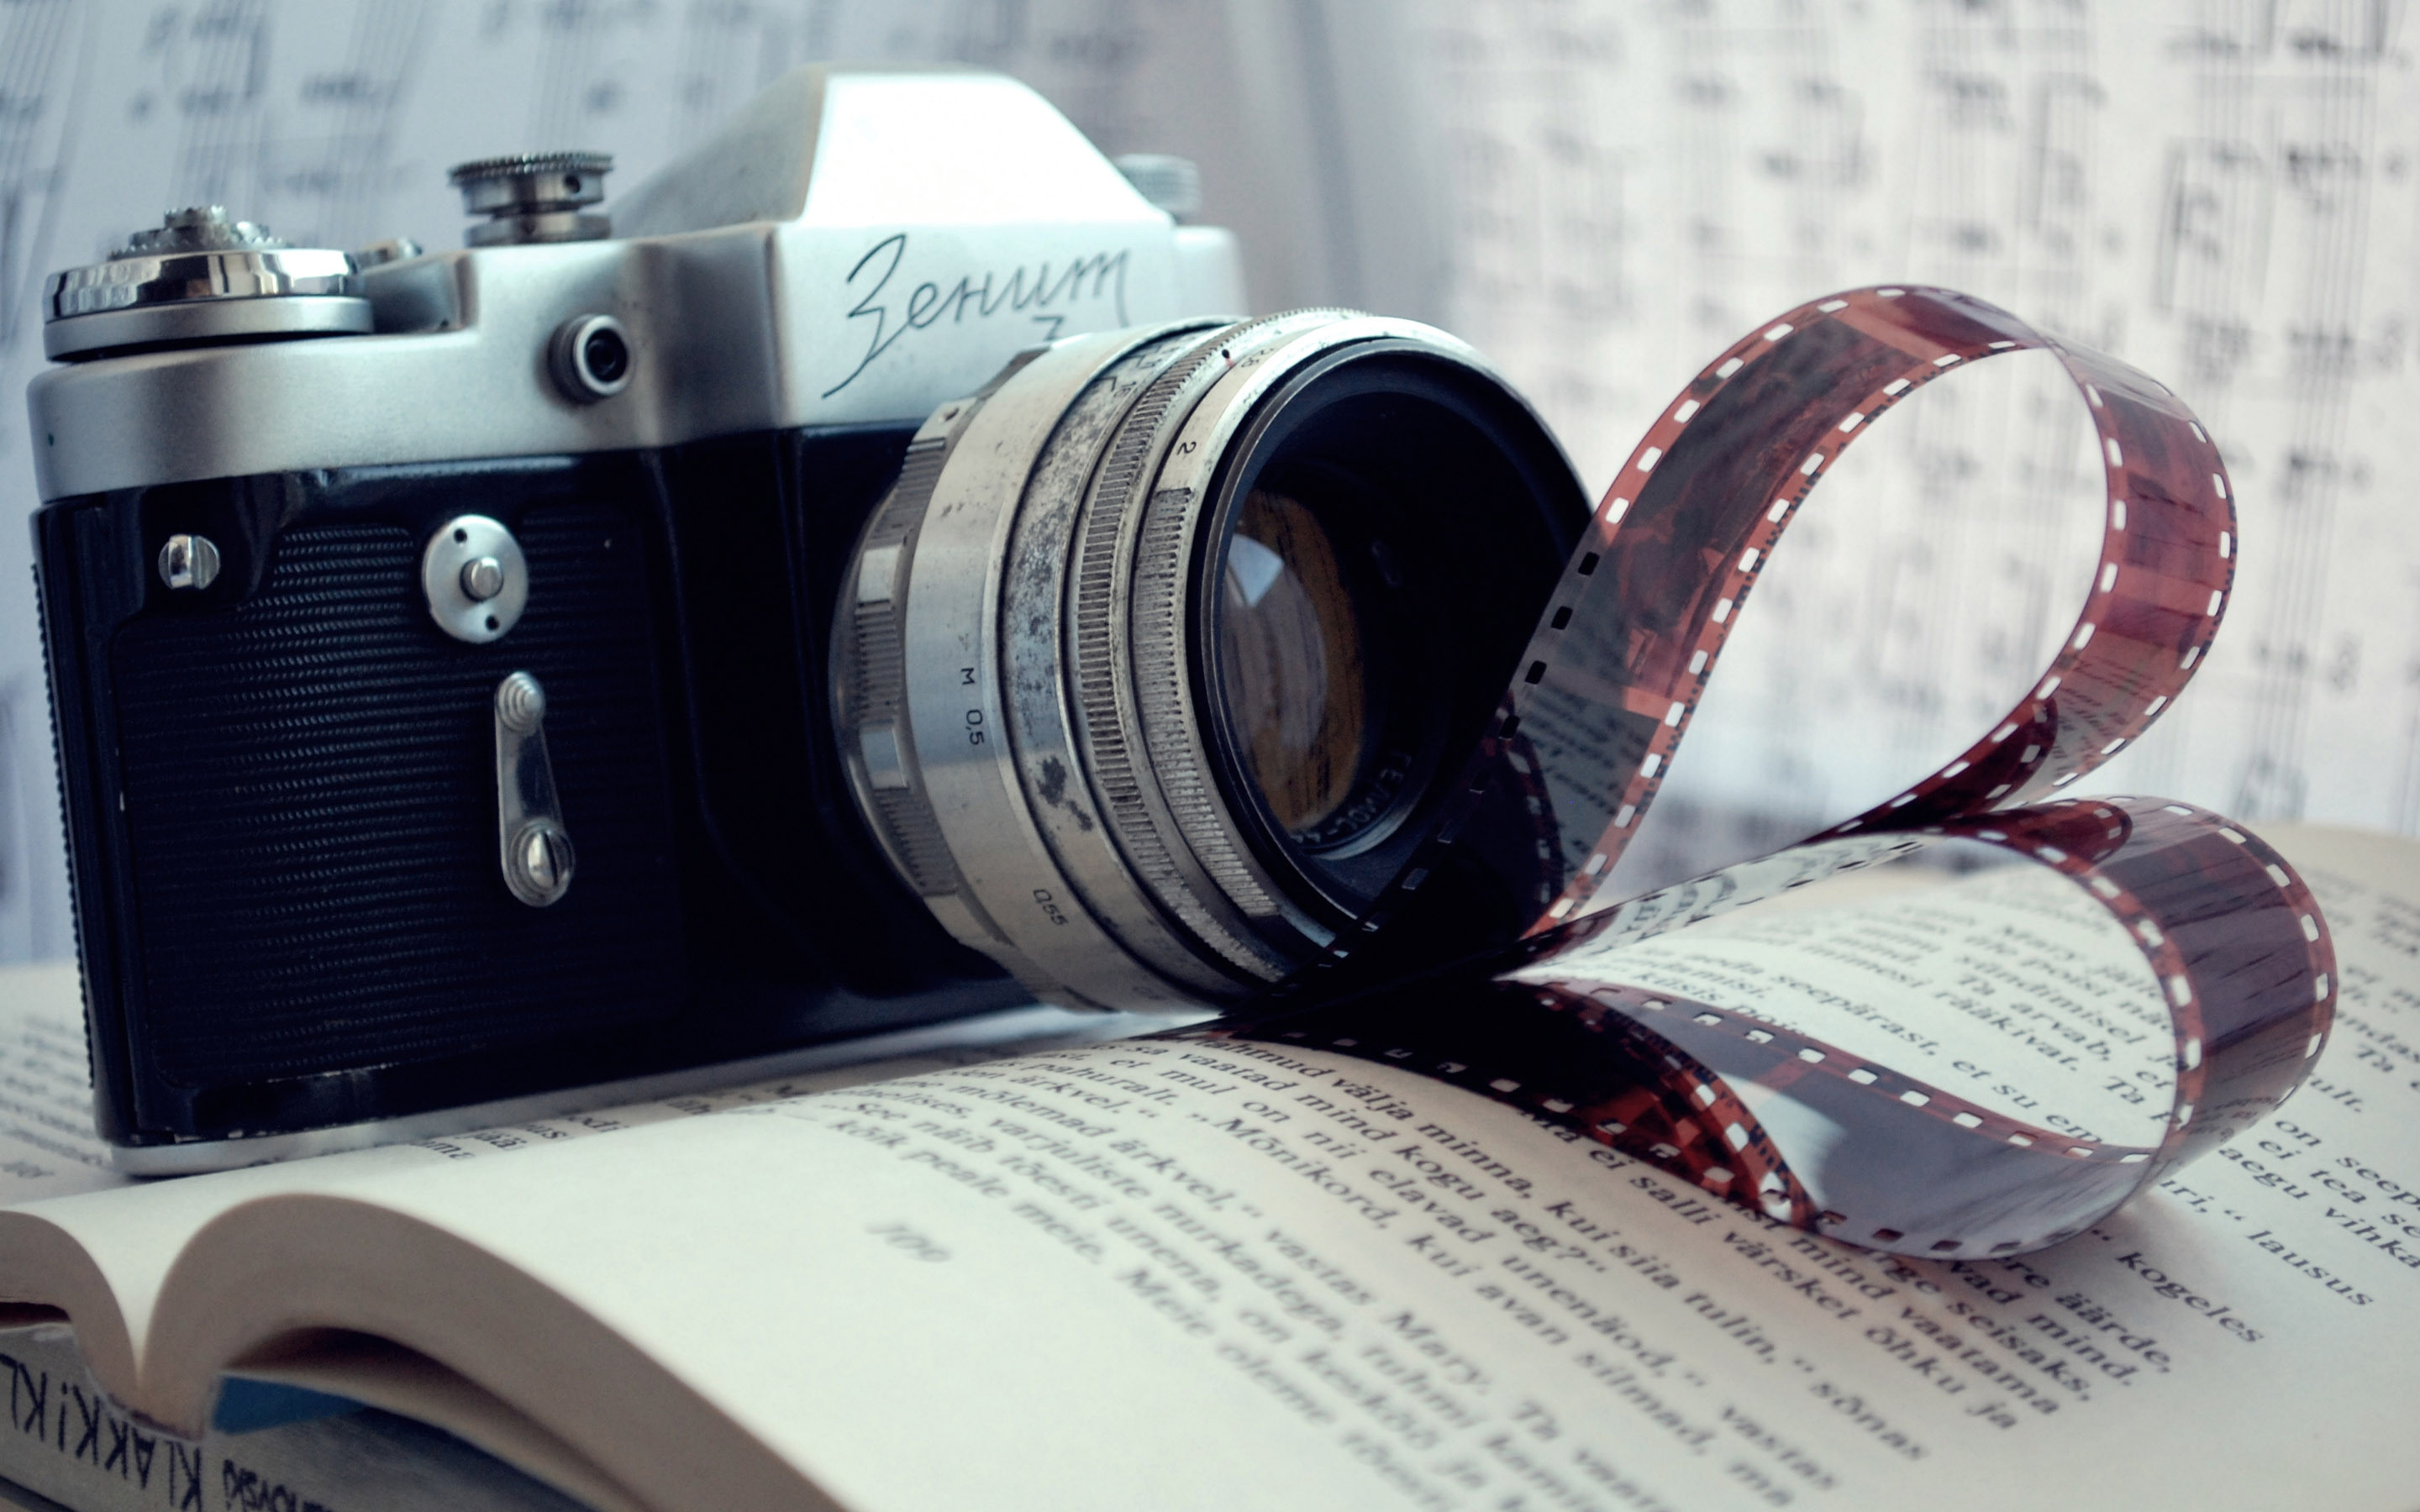 2880x1800 Related Wallpapers HD. Vintage Camera Wallpaper Widescreen